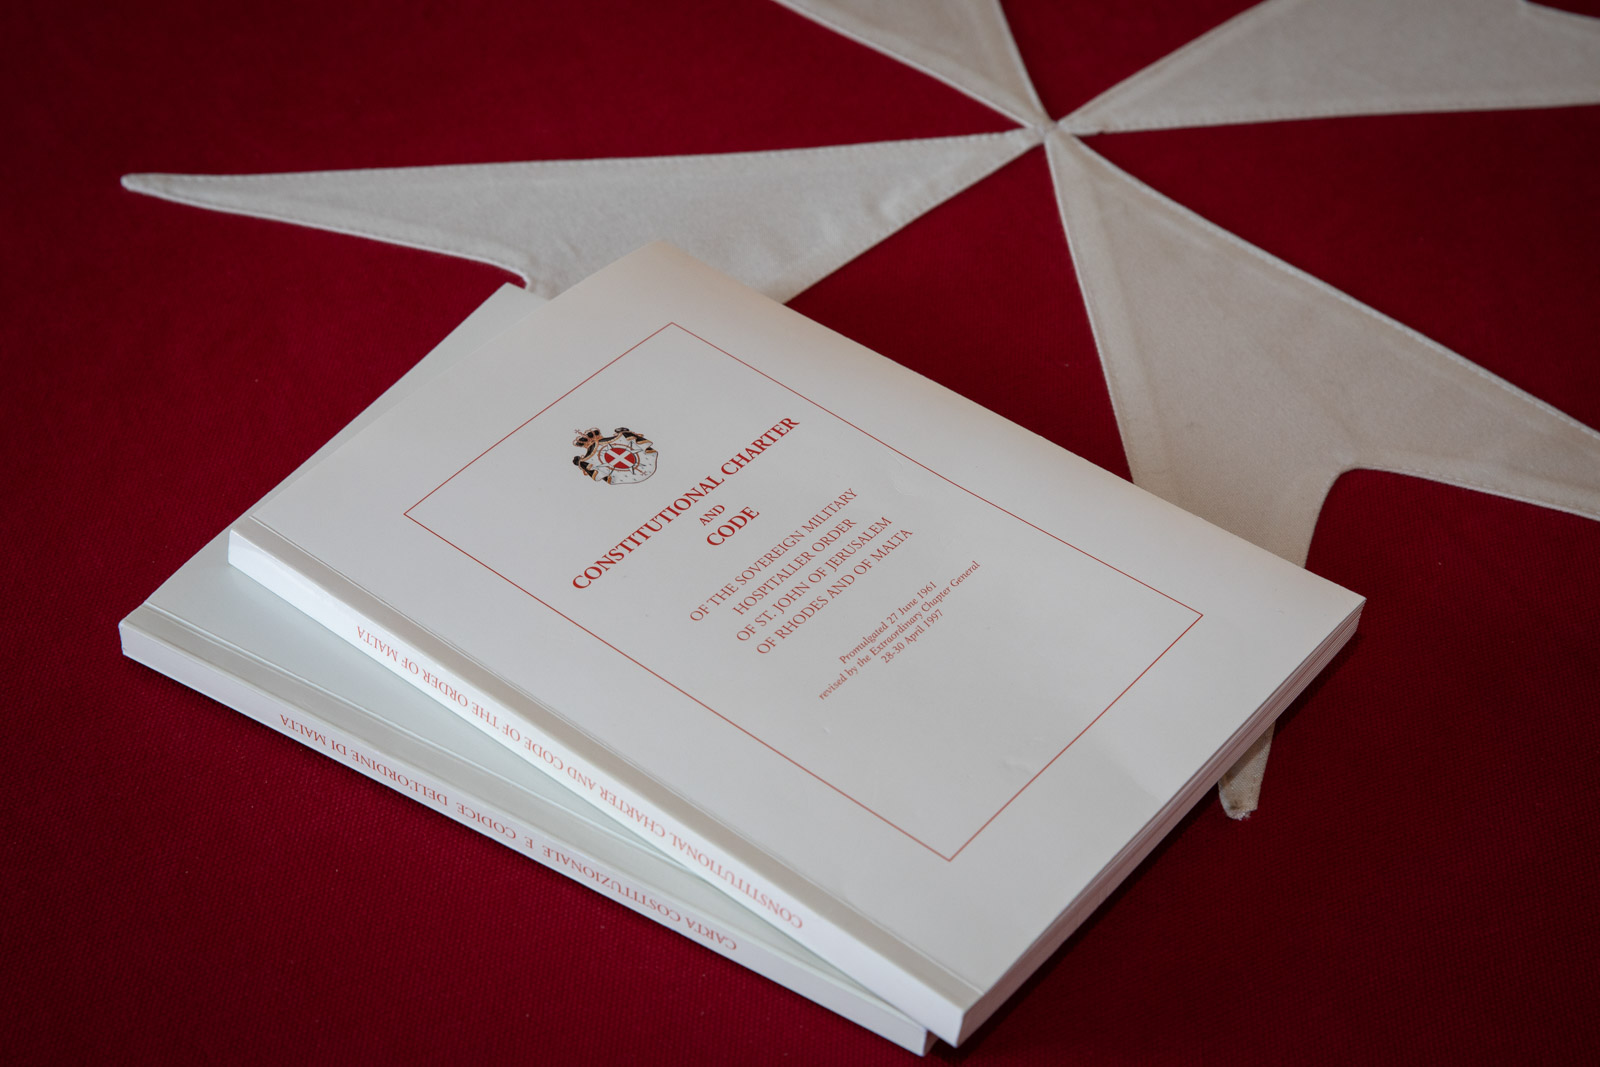 The Order of Malta’s new Constitution